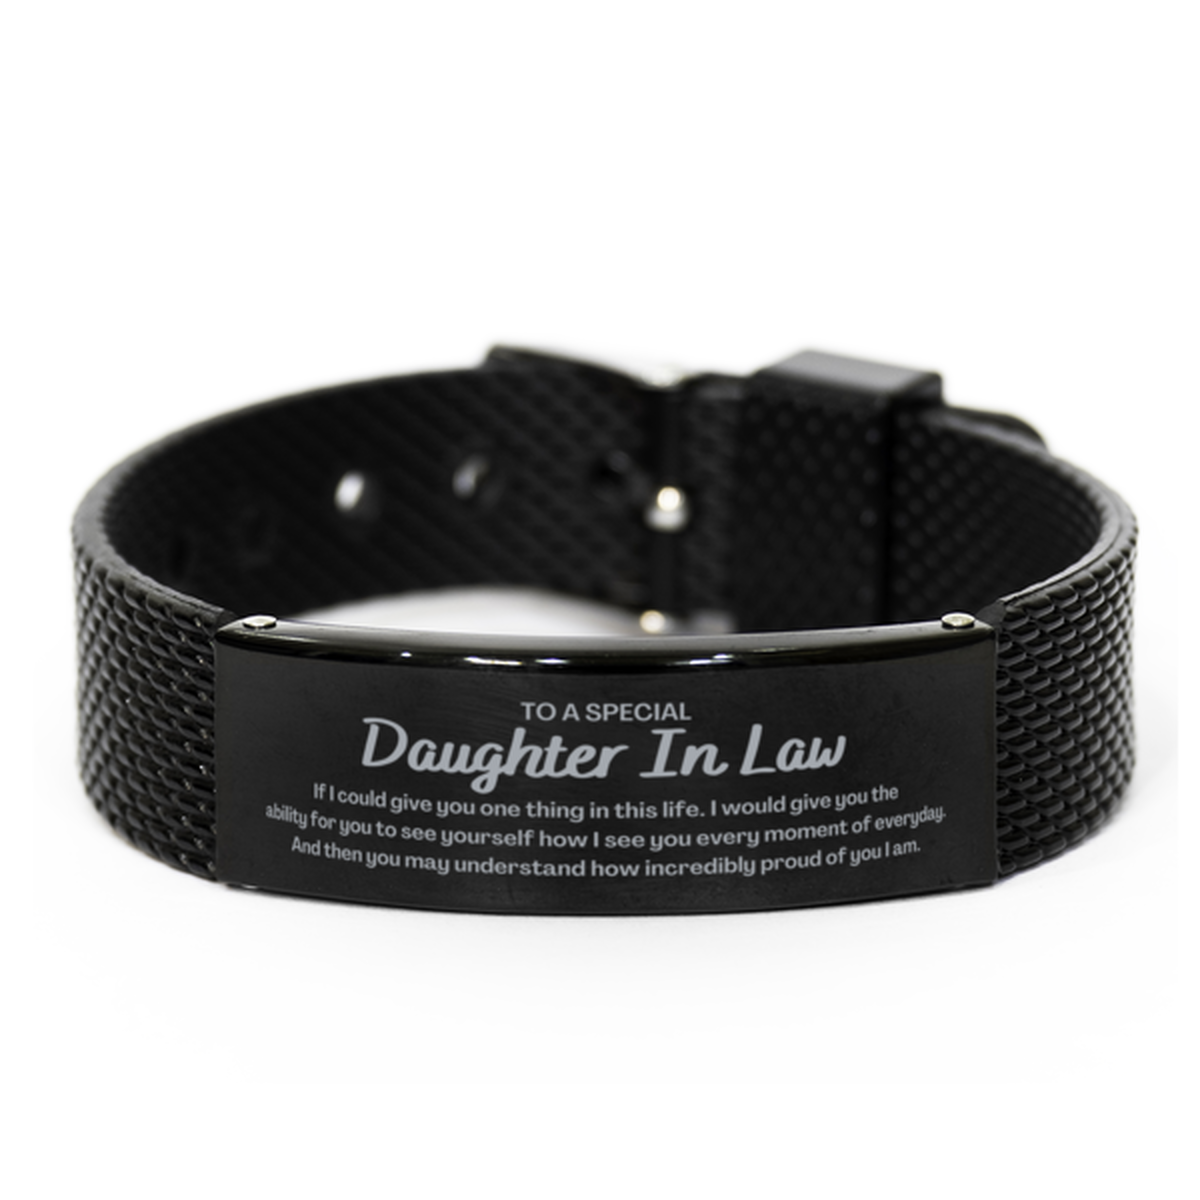 To My Daughter In Law Black Shark Mesh Bracelet, Gifts For Daughter In Law Engraved, Inspirational Gifts for Christmas Birthday, Epic Gifts for Daughter In Law To A Special Daughter In Law how incredibly proud of you I am